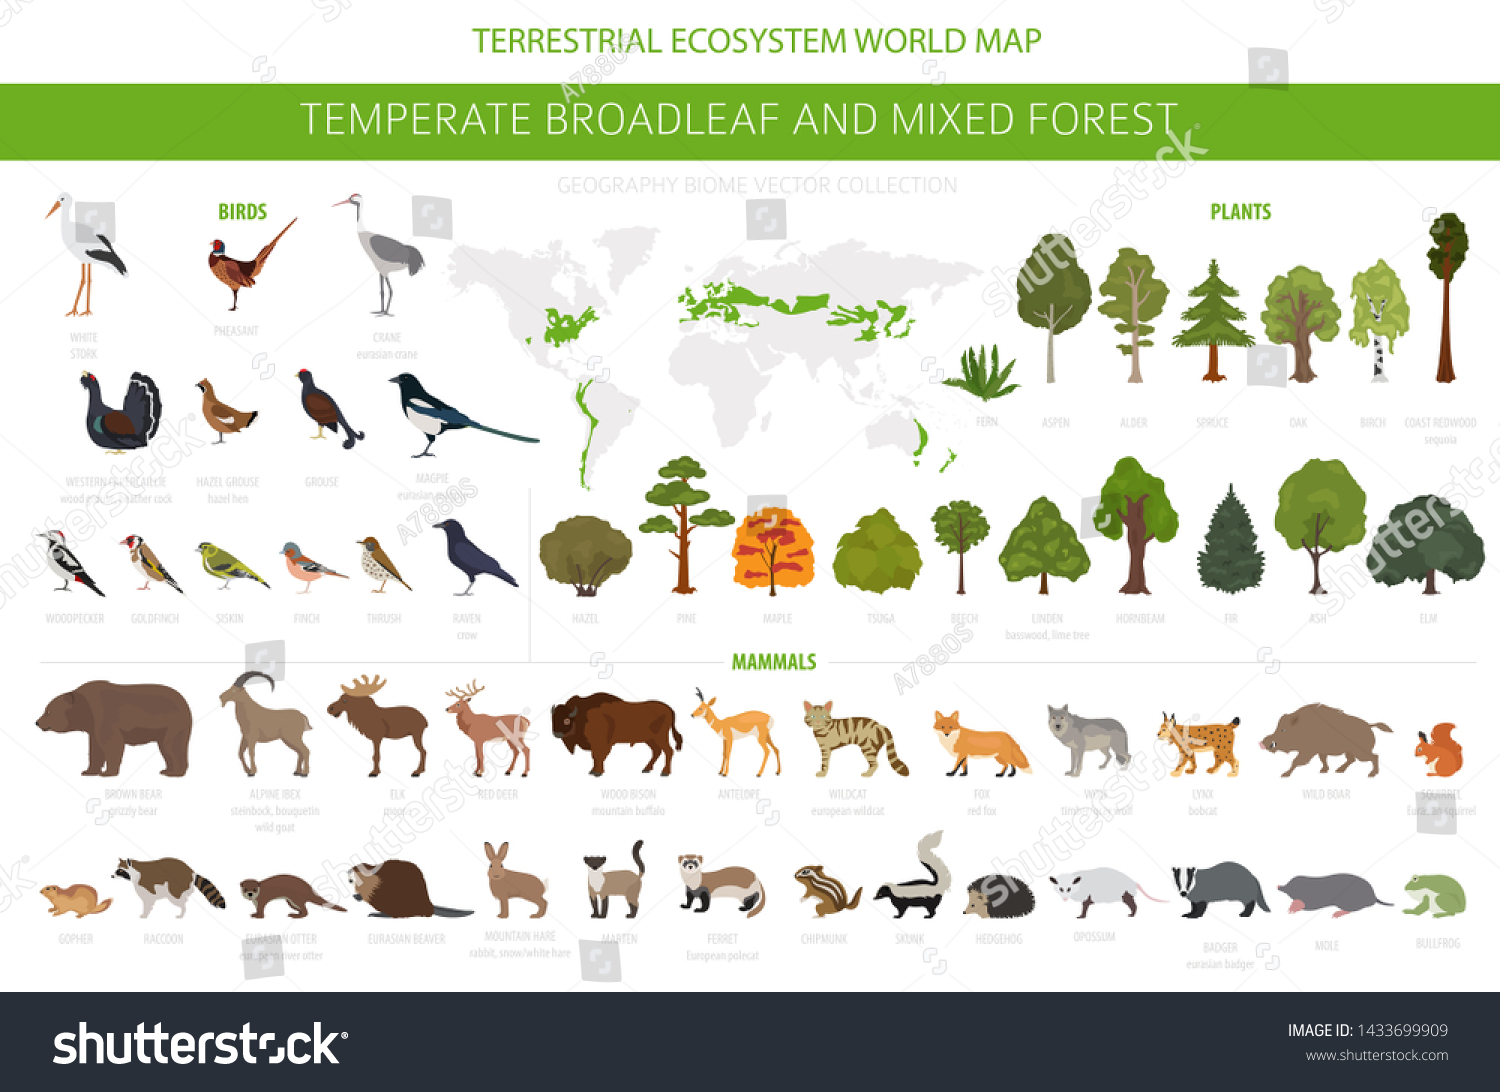 SVG of Temperate broadleaf forest and mixed forest biome. Terrestrial ecosystem world map. Animals, birds and plants graphic design. Vector illustration svg